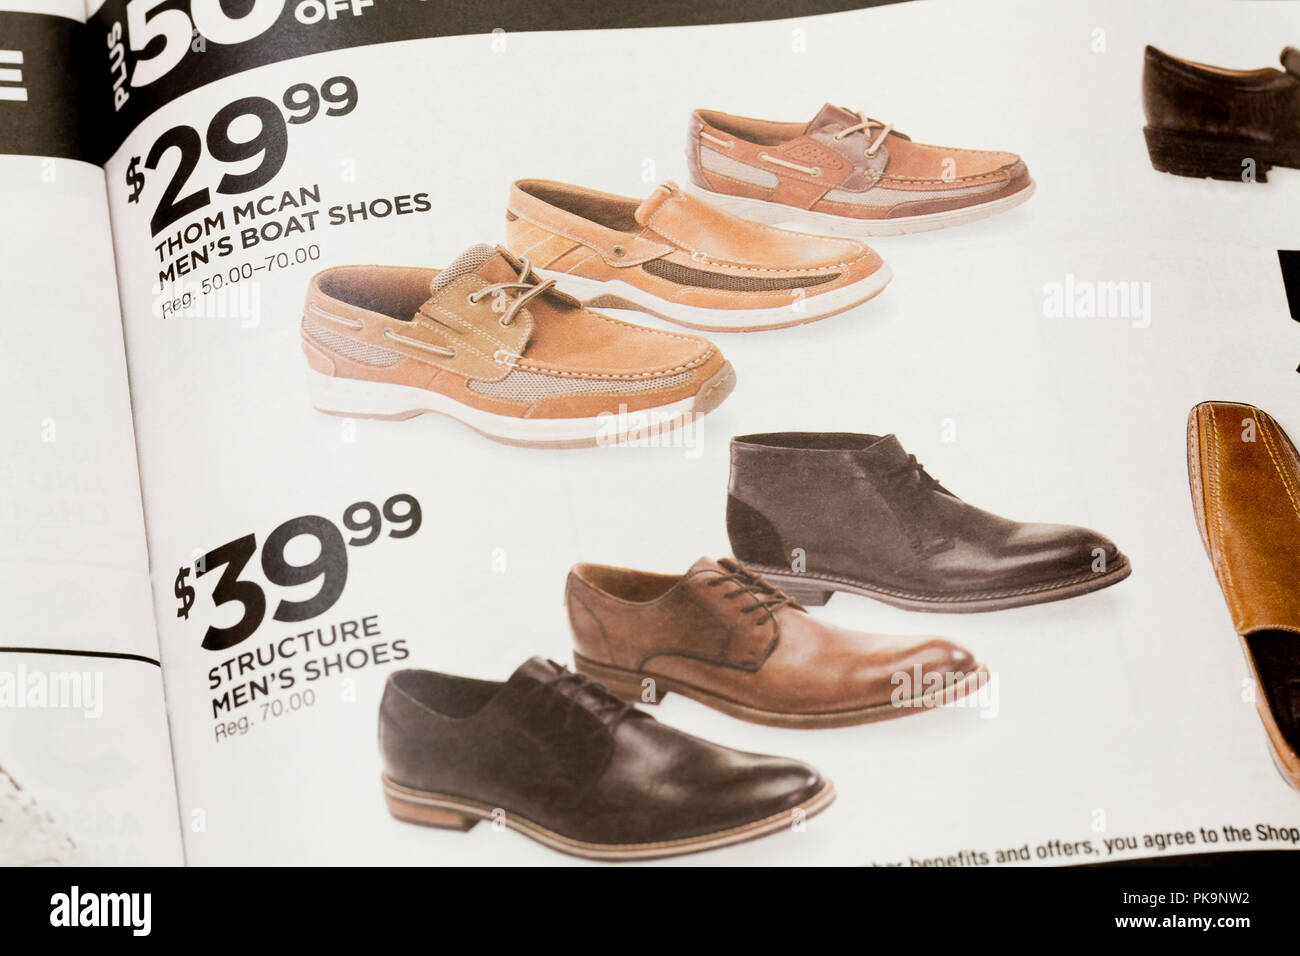 Shoes on sale ad in weekly mailer advertisement - USA Stock Photo